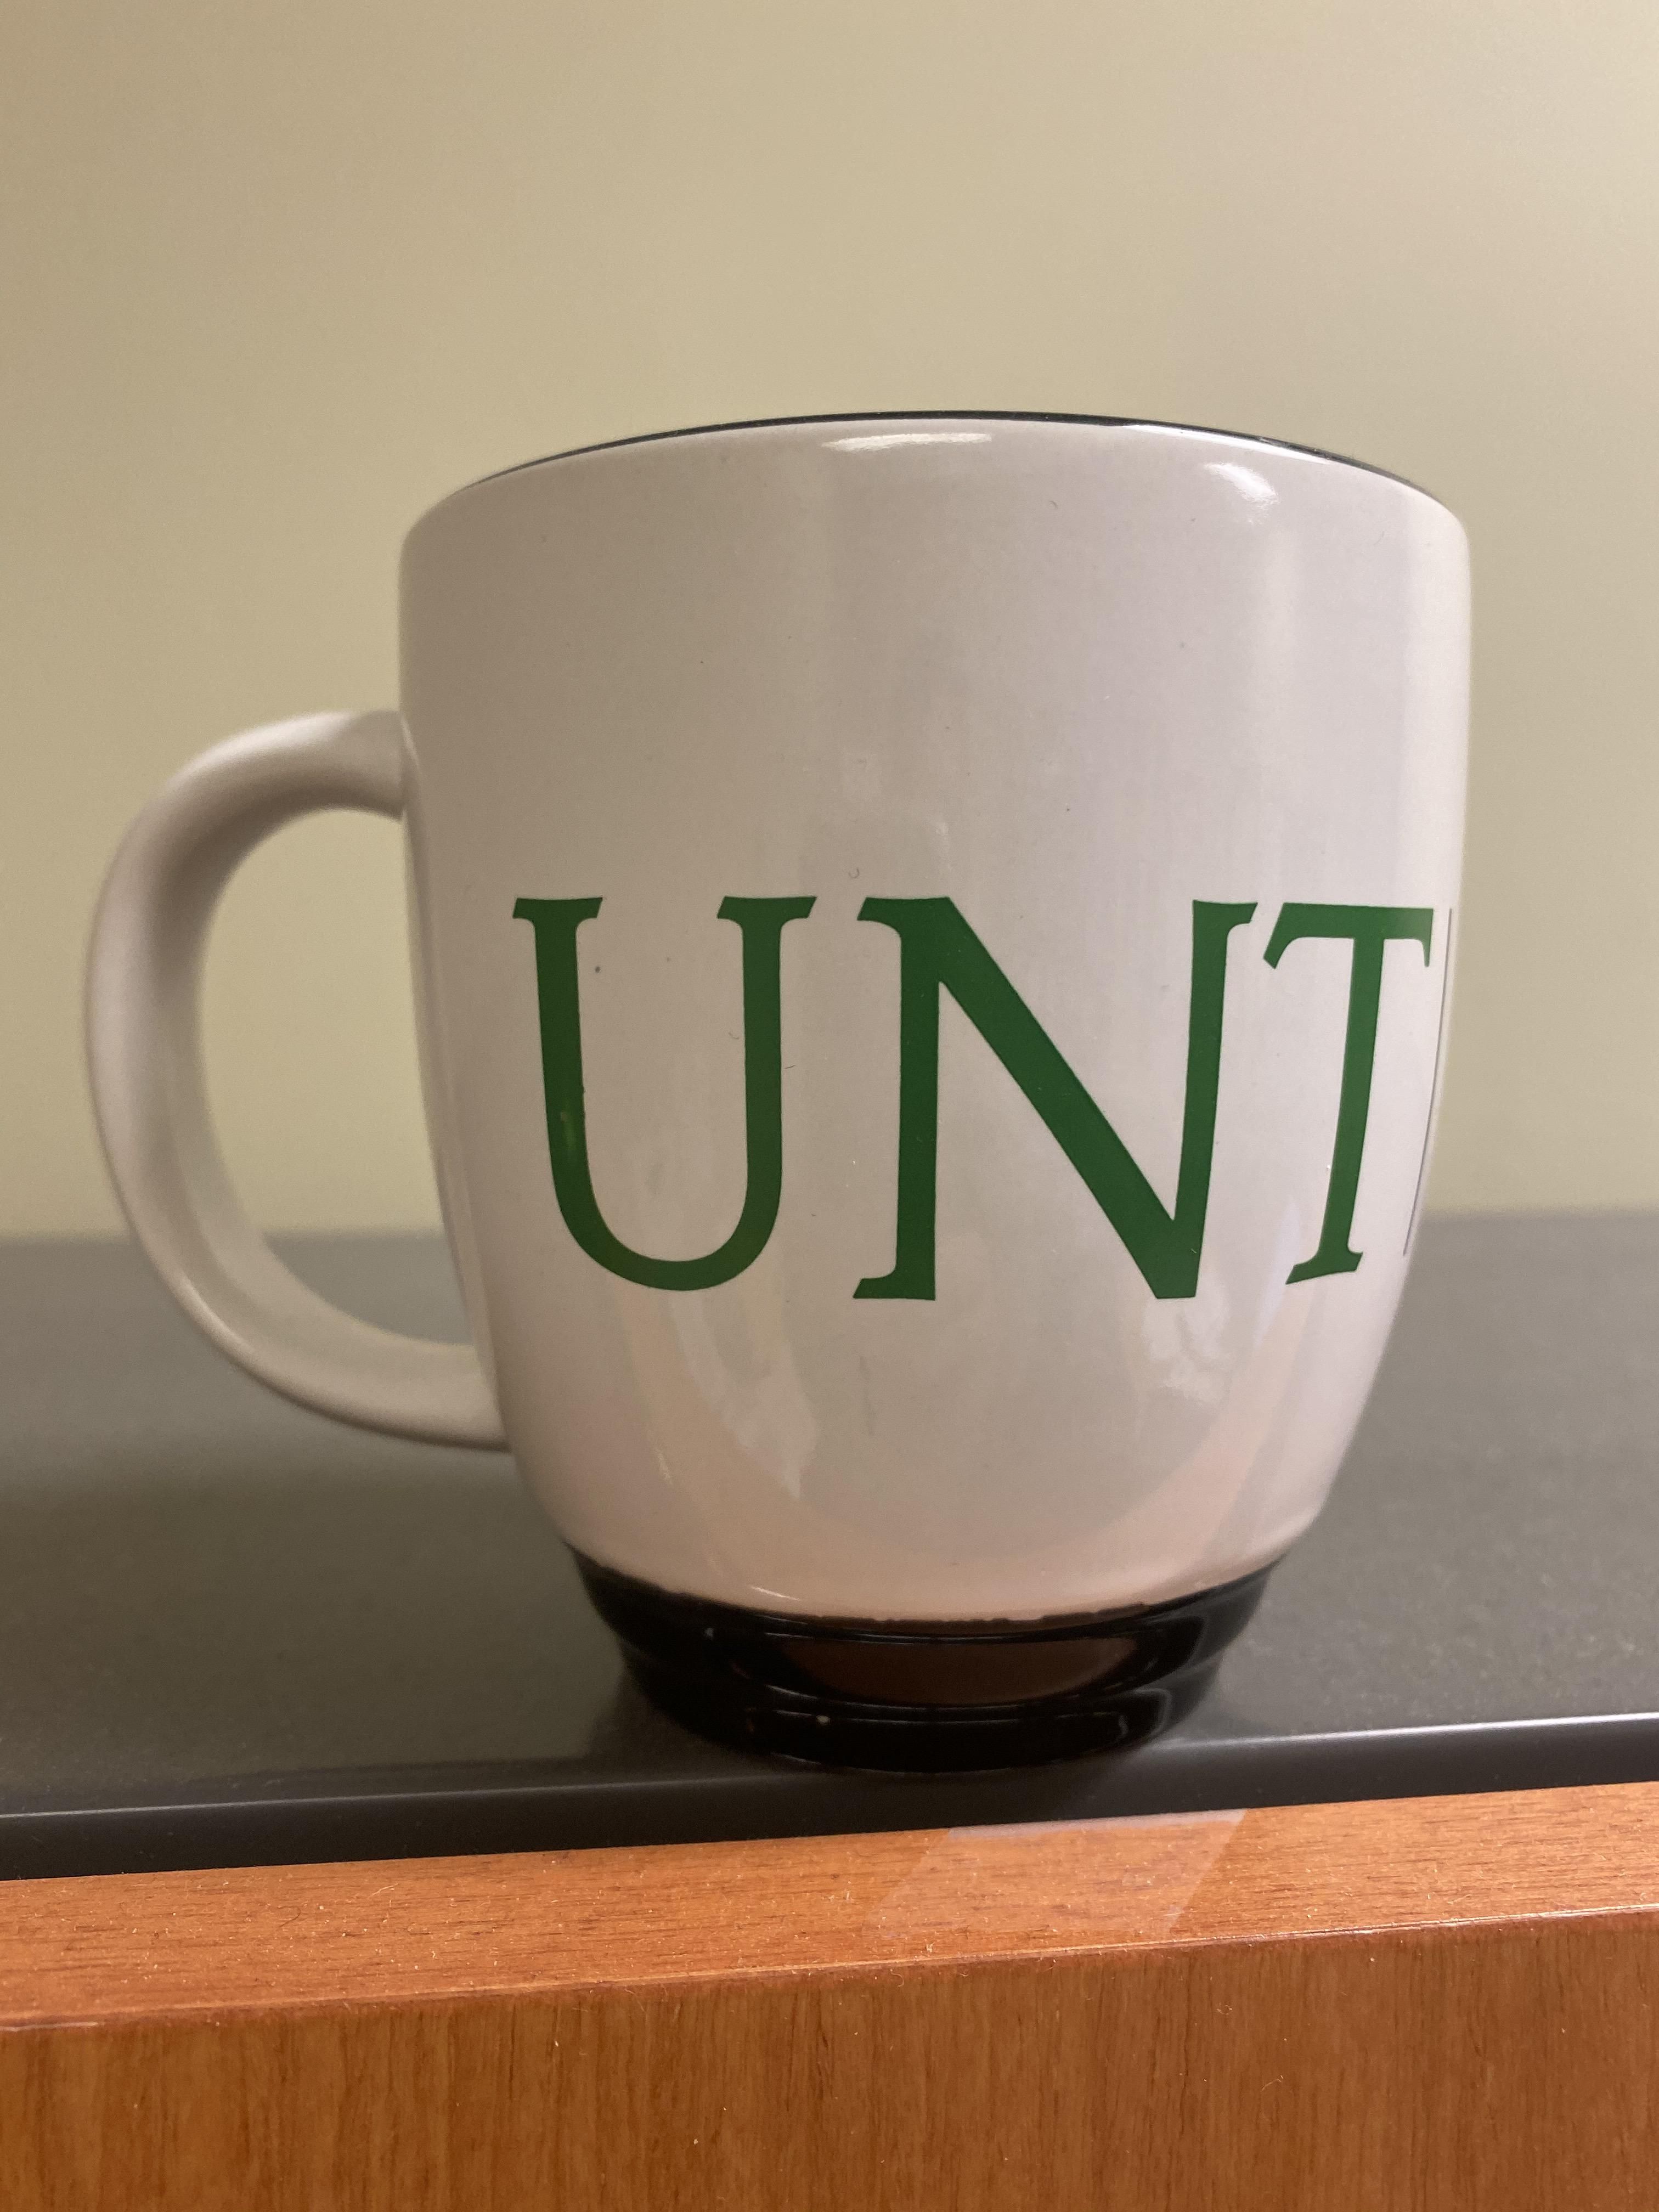 Poor choice University of North Texas...